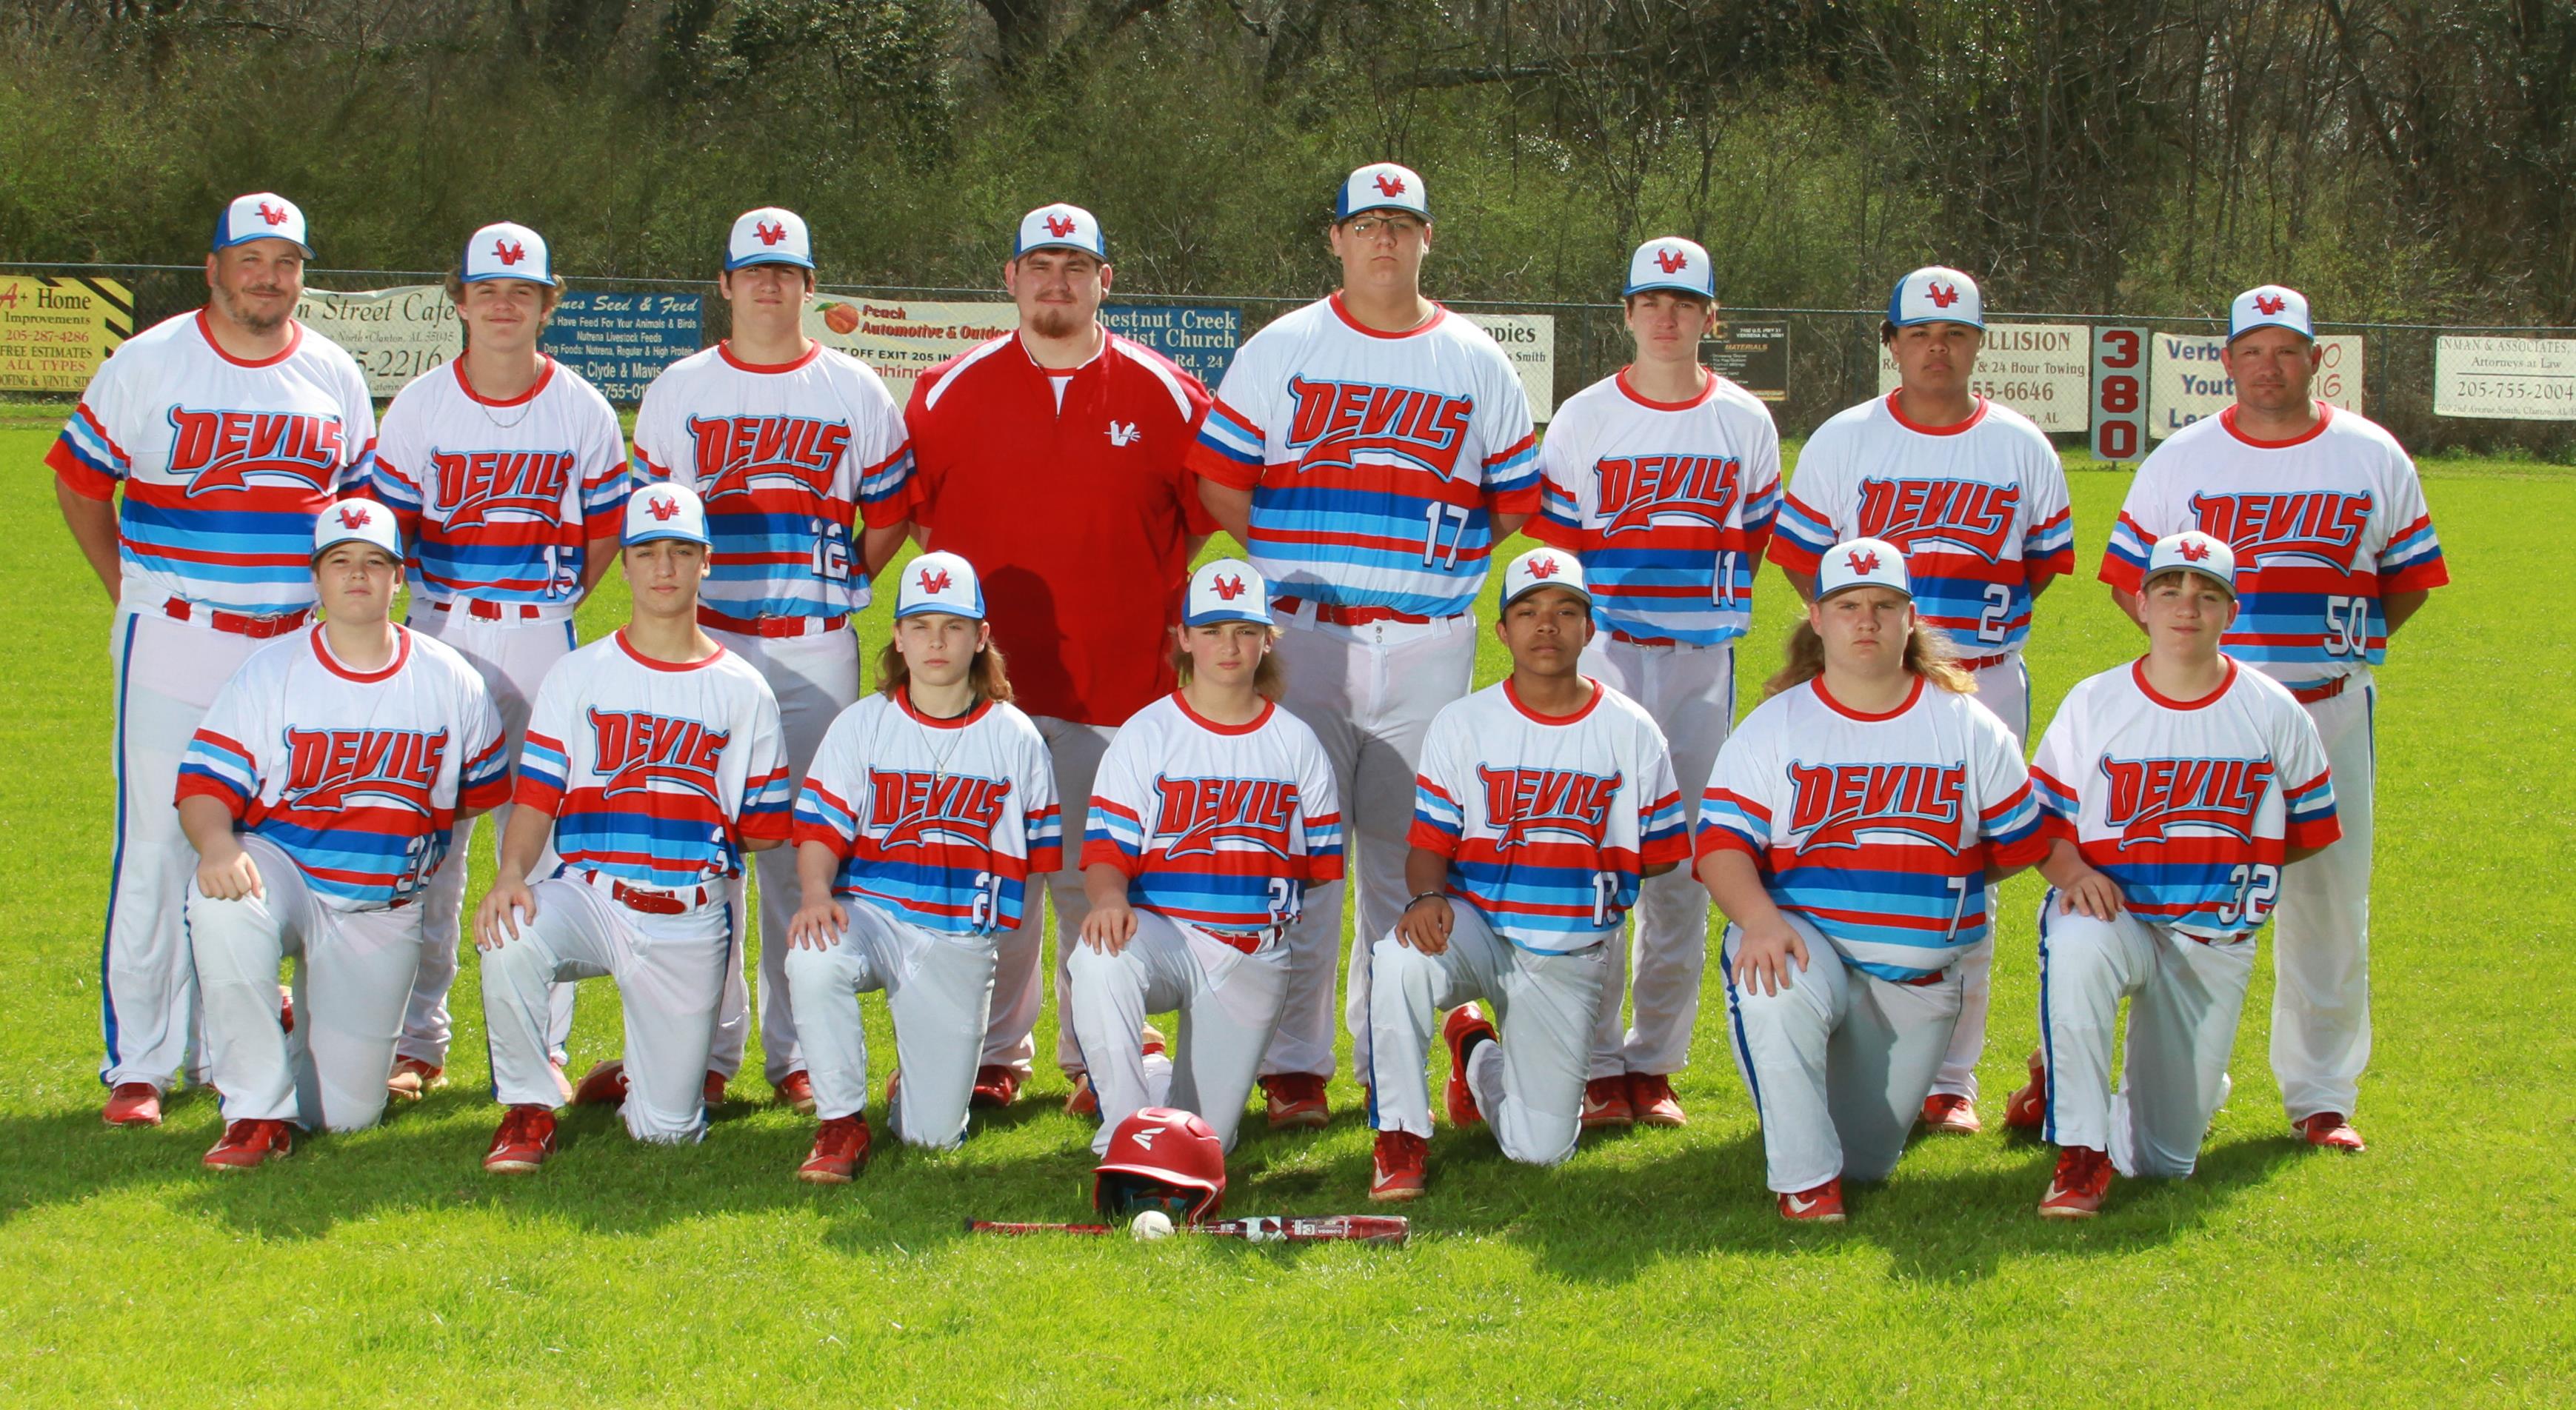 jv players and coach